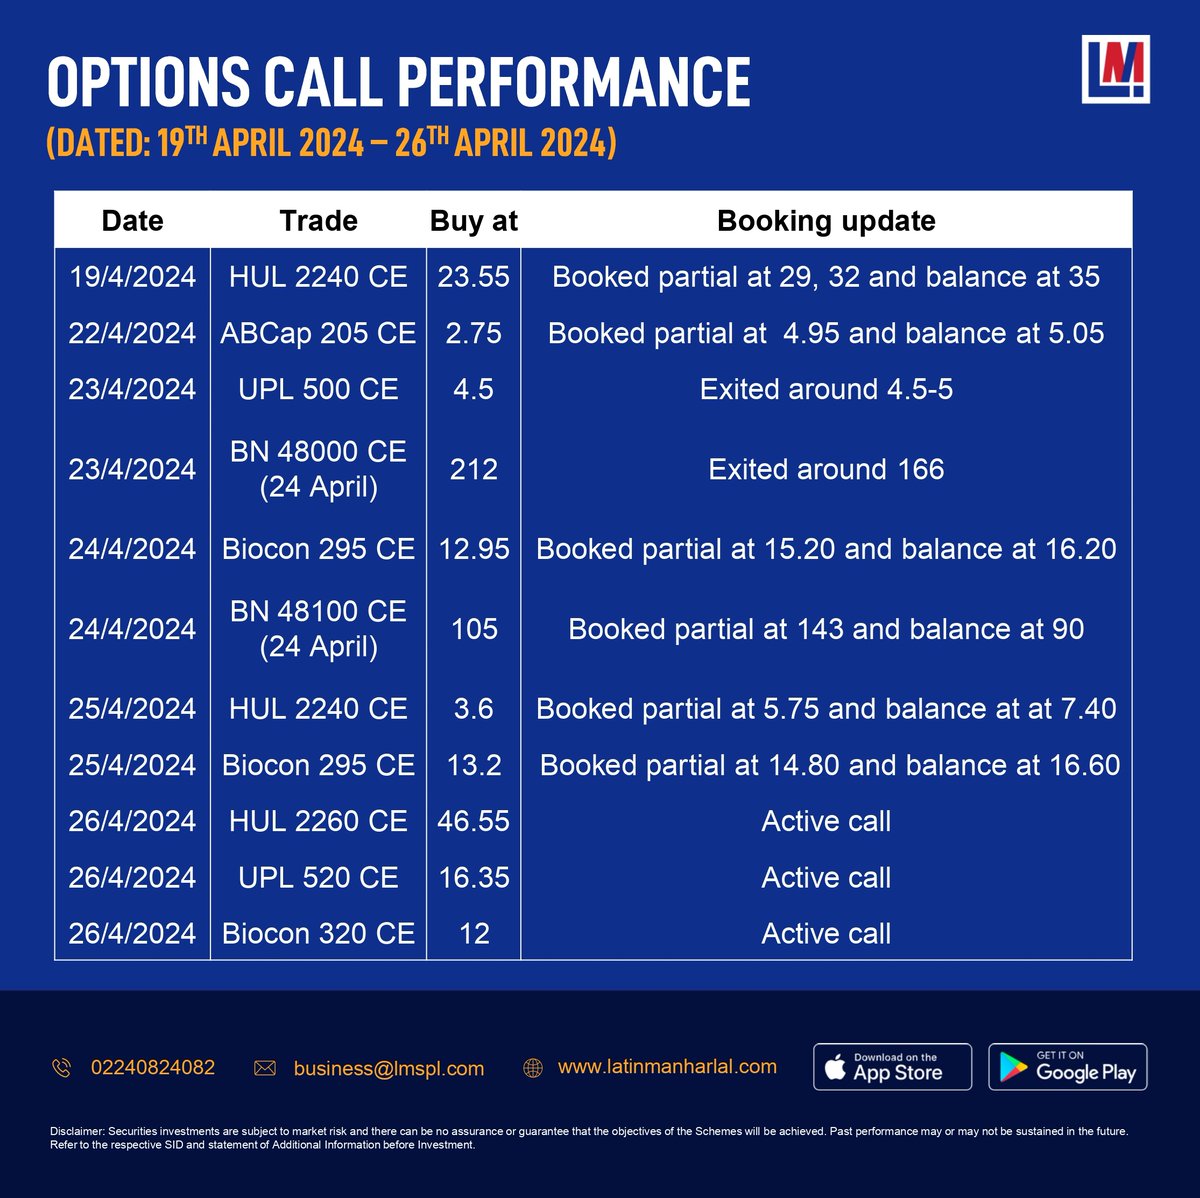 #Options Call performance dated 19th April to 26th April 2024. 

Disclaimer: bit.ly/3BuuZMf #nifty #banknifty #optionscalls #optionstrading #profit #trading #stockmarket #stockmarketindia #equity #sharetrading #trading #stocktips